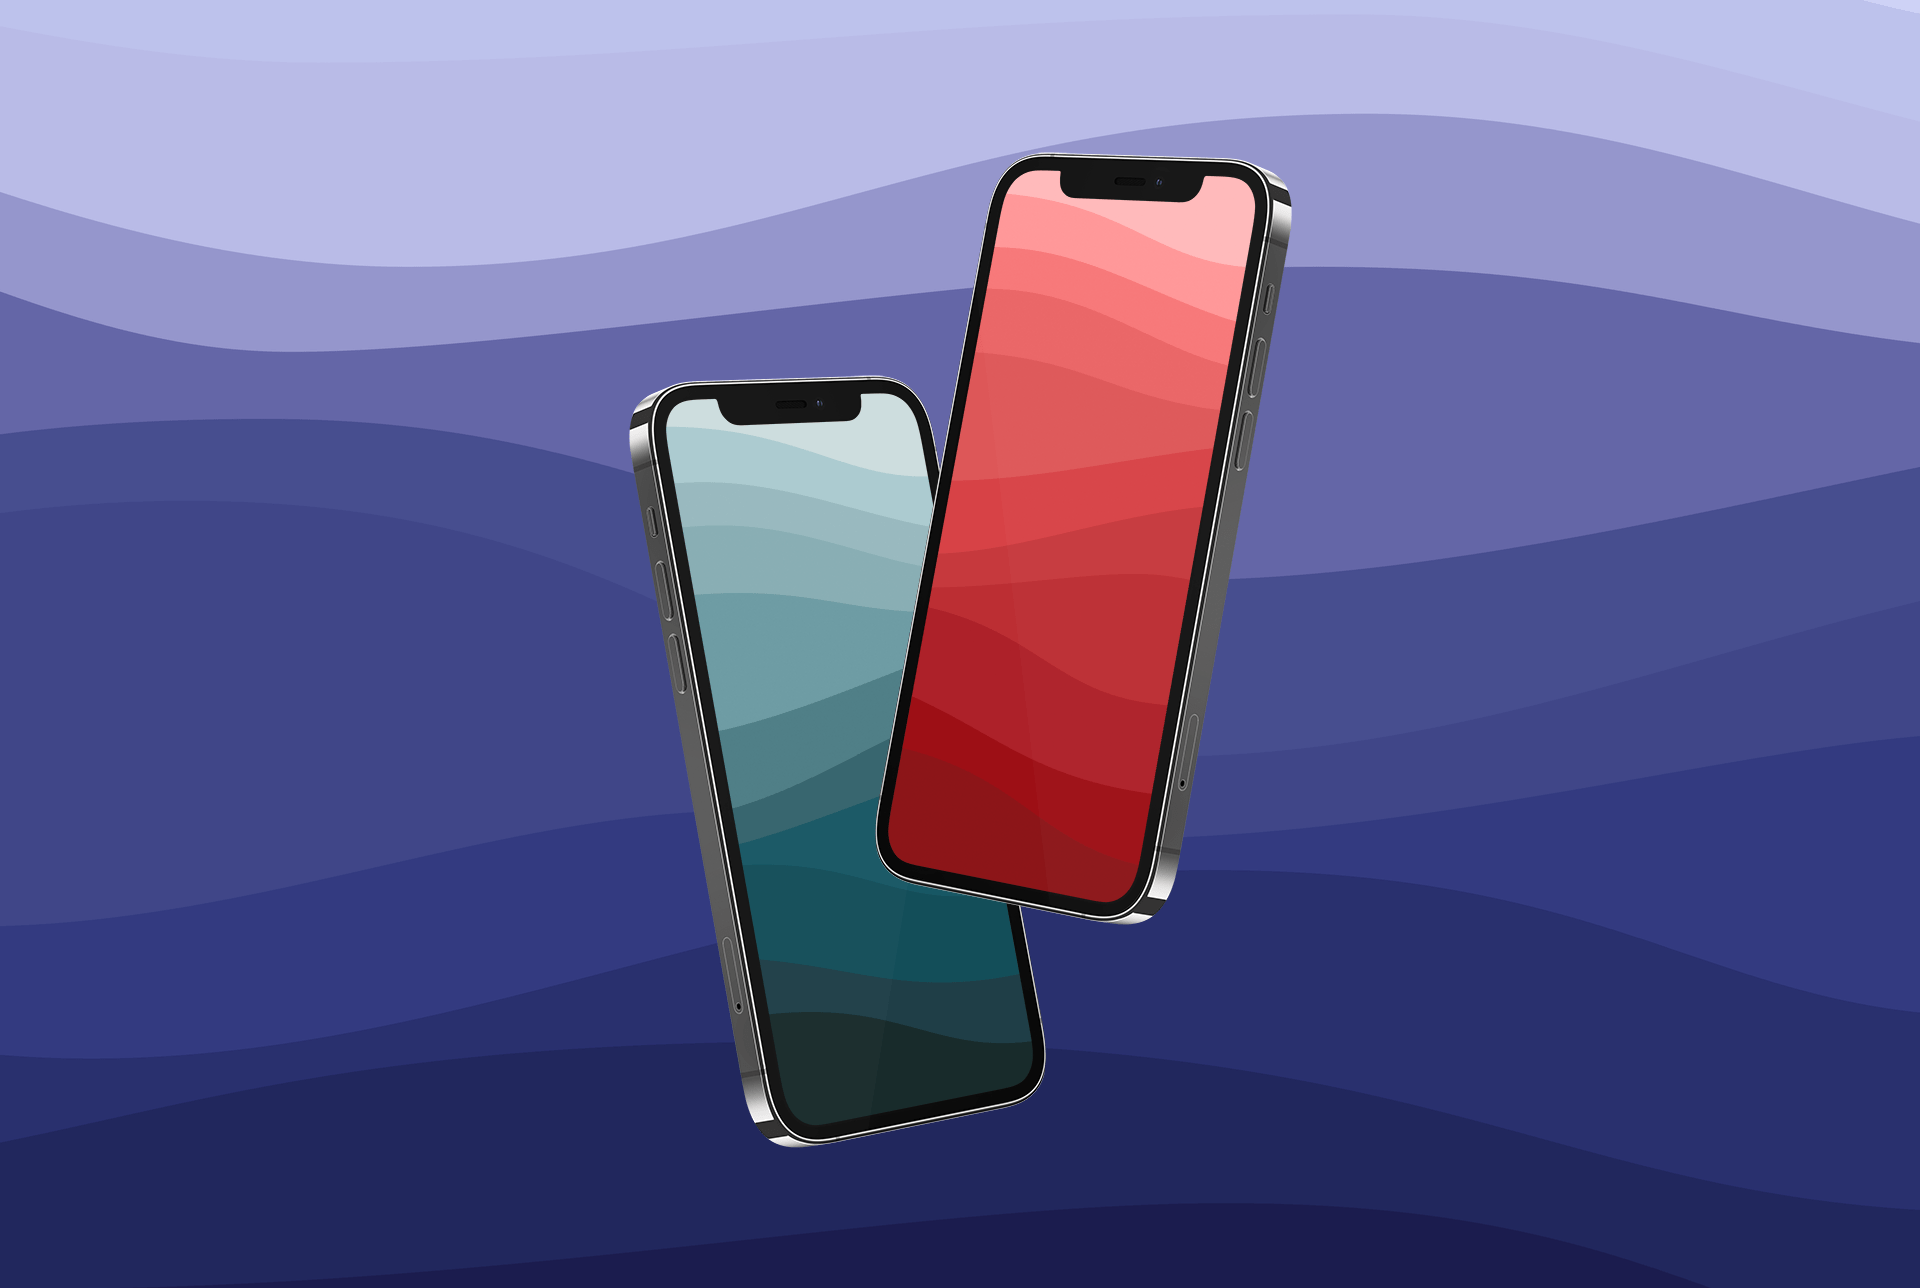 Making waves: a stunning minimalist set of wallpapers for iPhone